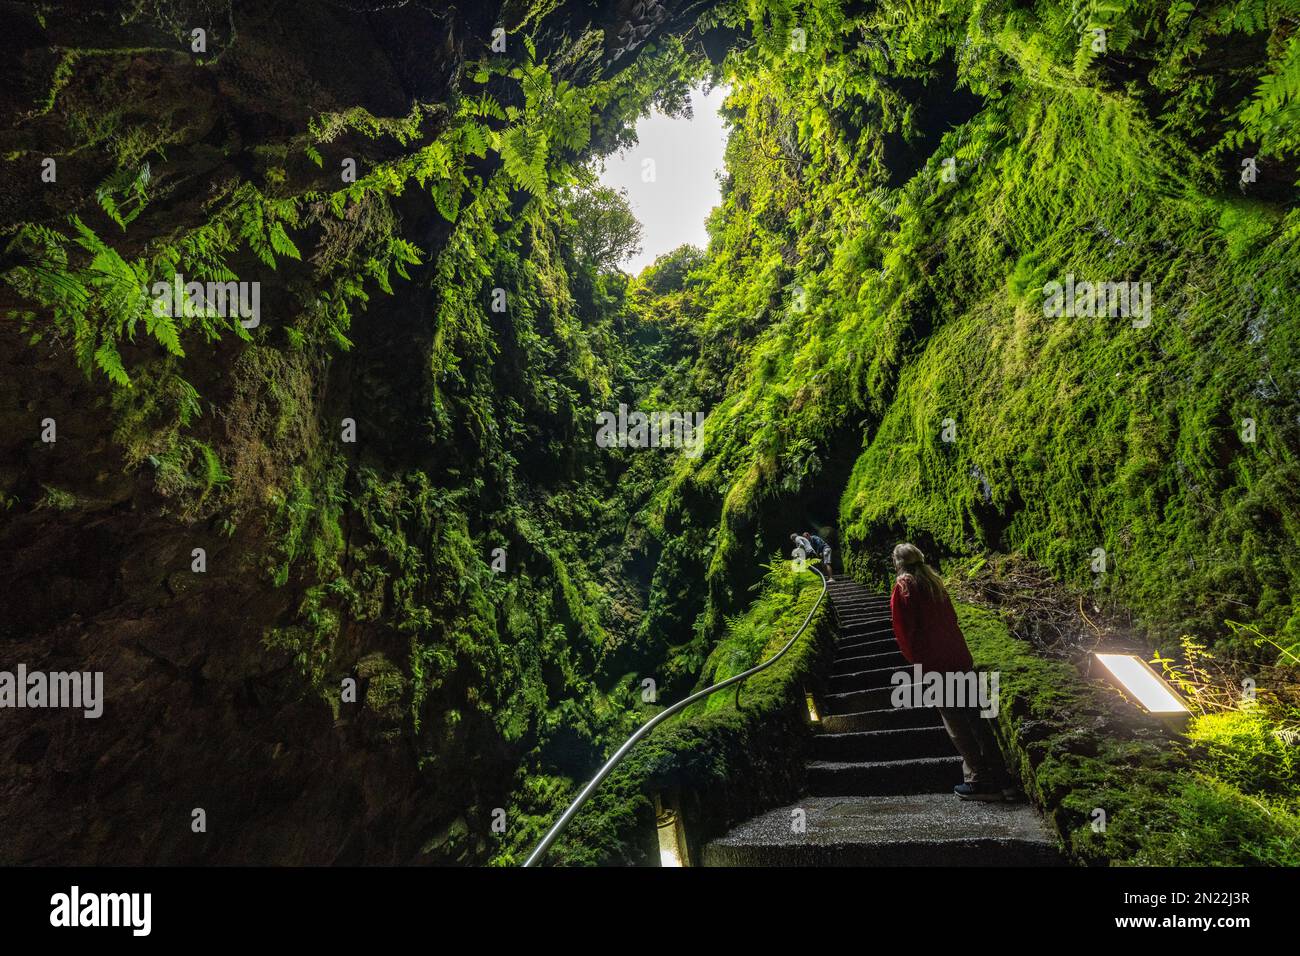 A tourist looks up inside the Algar do Carvão, a vertical lava tube dropping 300 feet from the surface accessible by a narrow staircase to a clear water pool at the bottom in the central mountains, Terceira Island, Azores, Portugal. Stock Photo